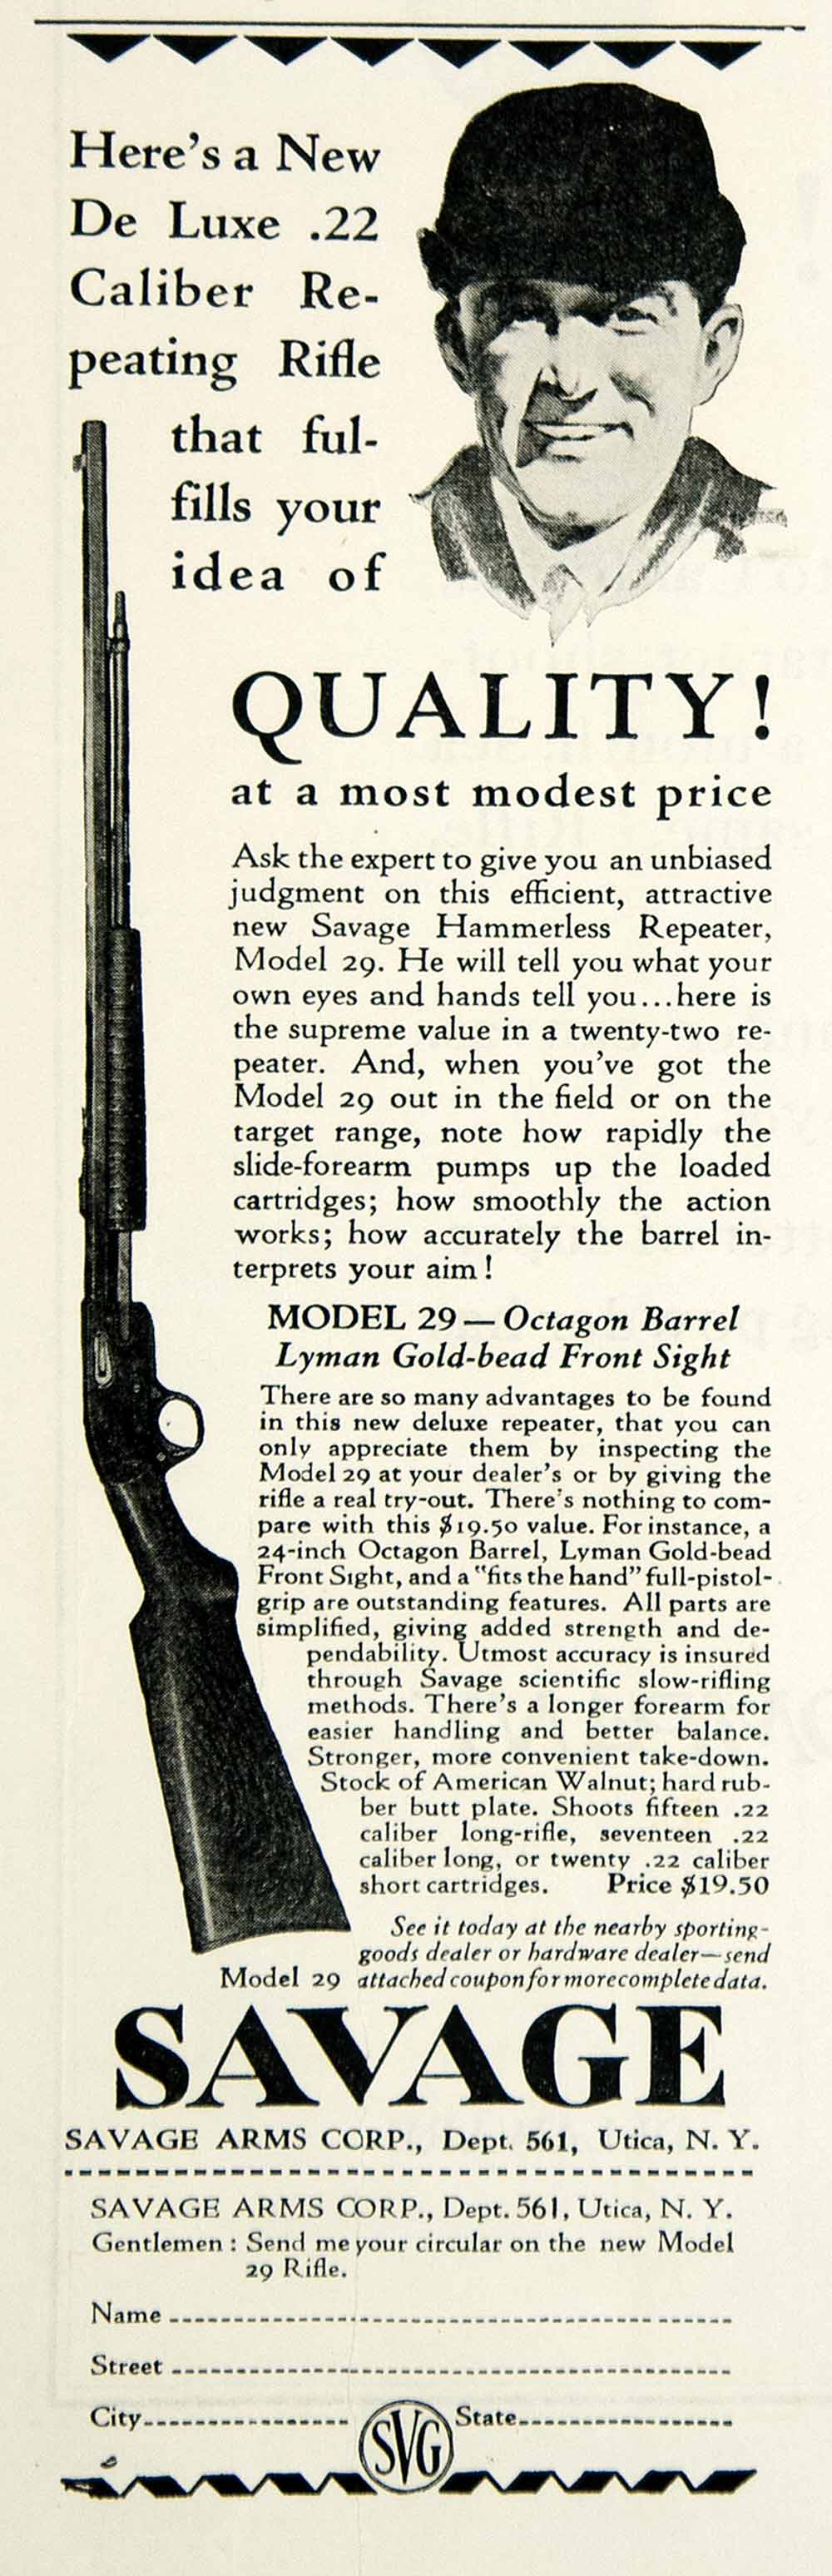 1929 Ad Savage Arms Model 29 DeLuxe Repeating Rifle Hunting Gun Sportsman YAR1